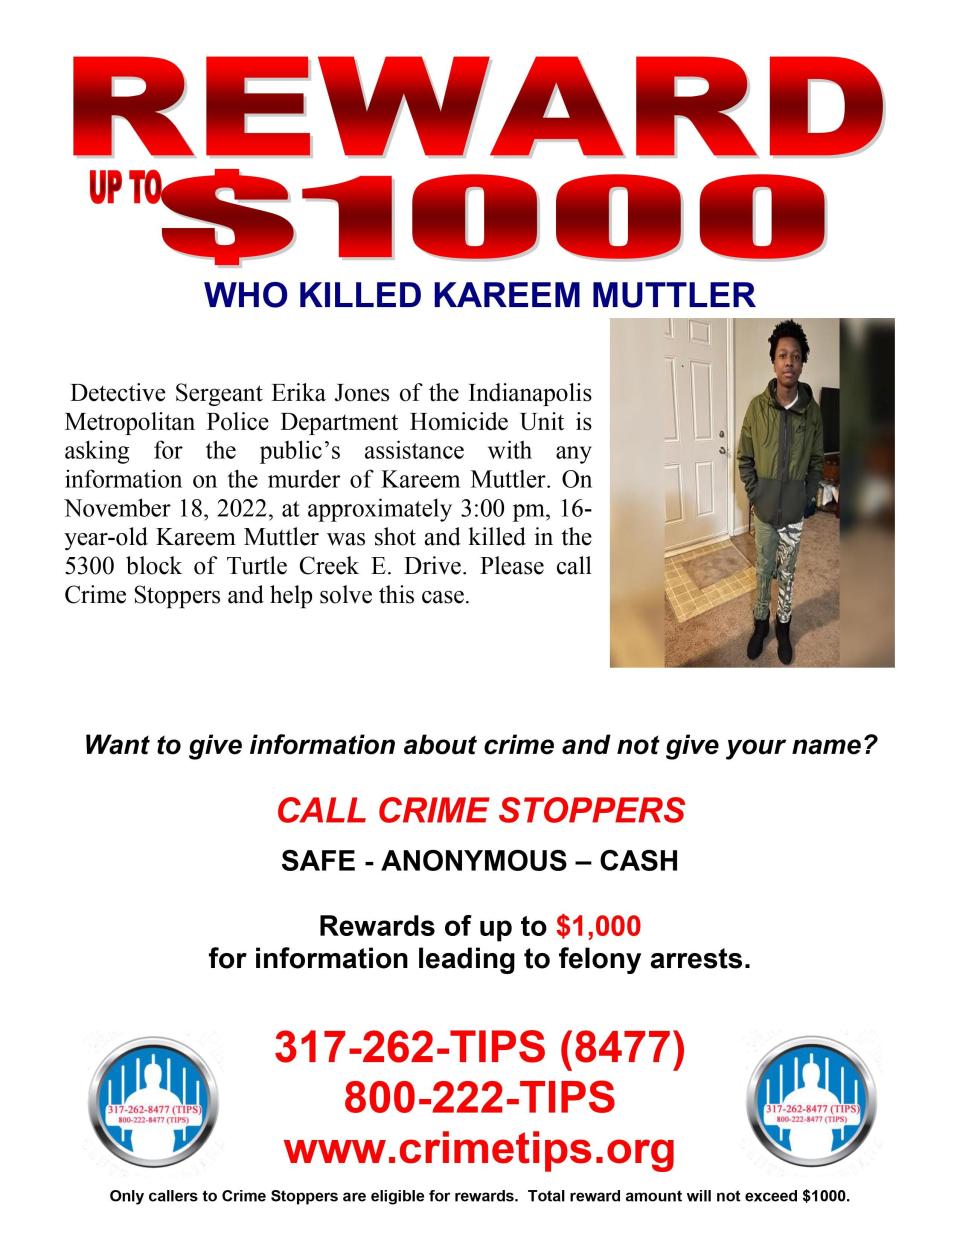 The goal of Crime Stoppers of Central Indiana, a nonprofit founded in 1985, is to take anonymous crime tips from the public and get them to the right law enforcement investigating unit, said the organization's director Daniel Rosenberg.